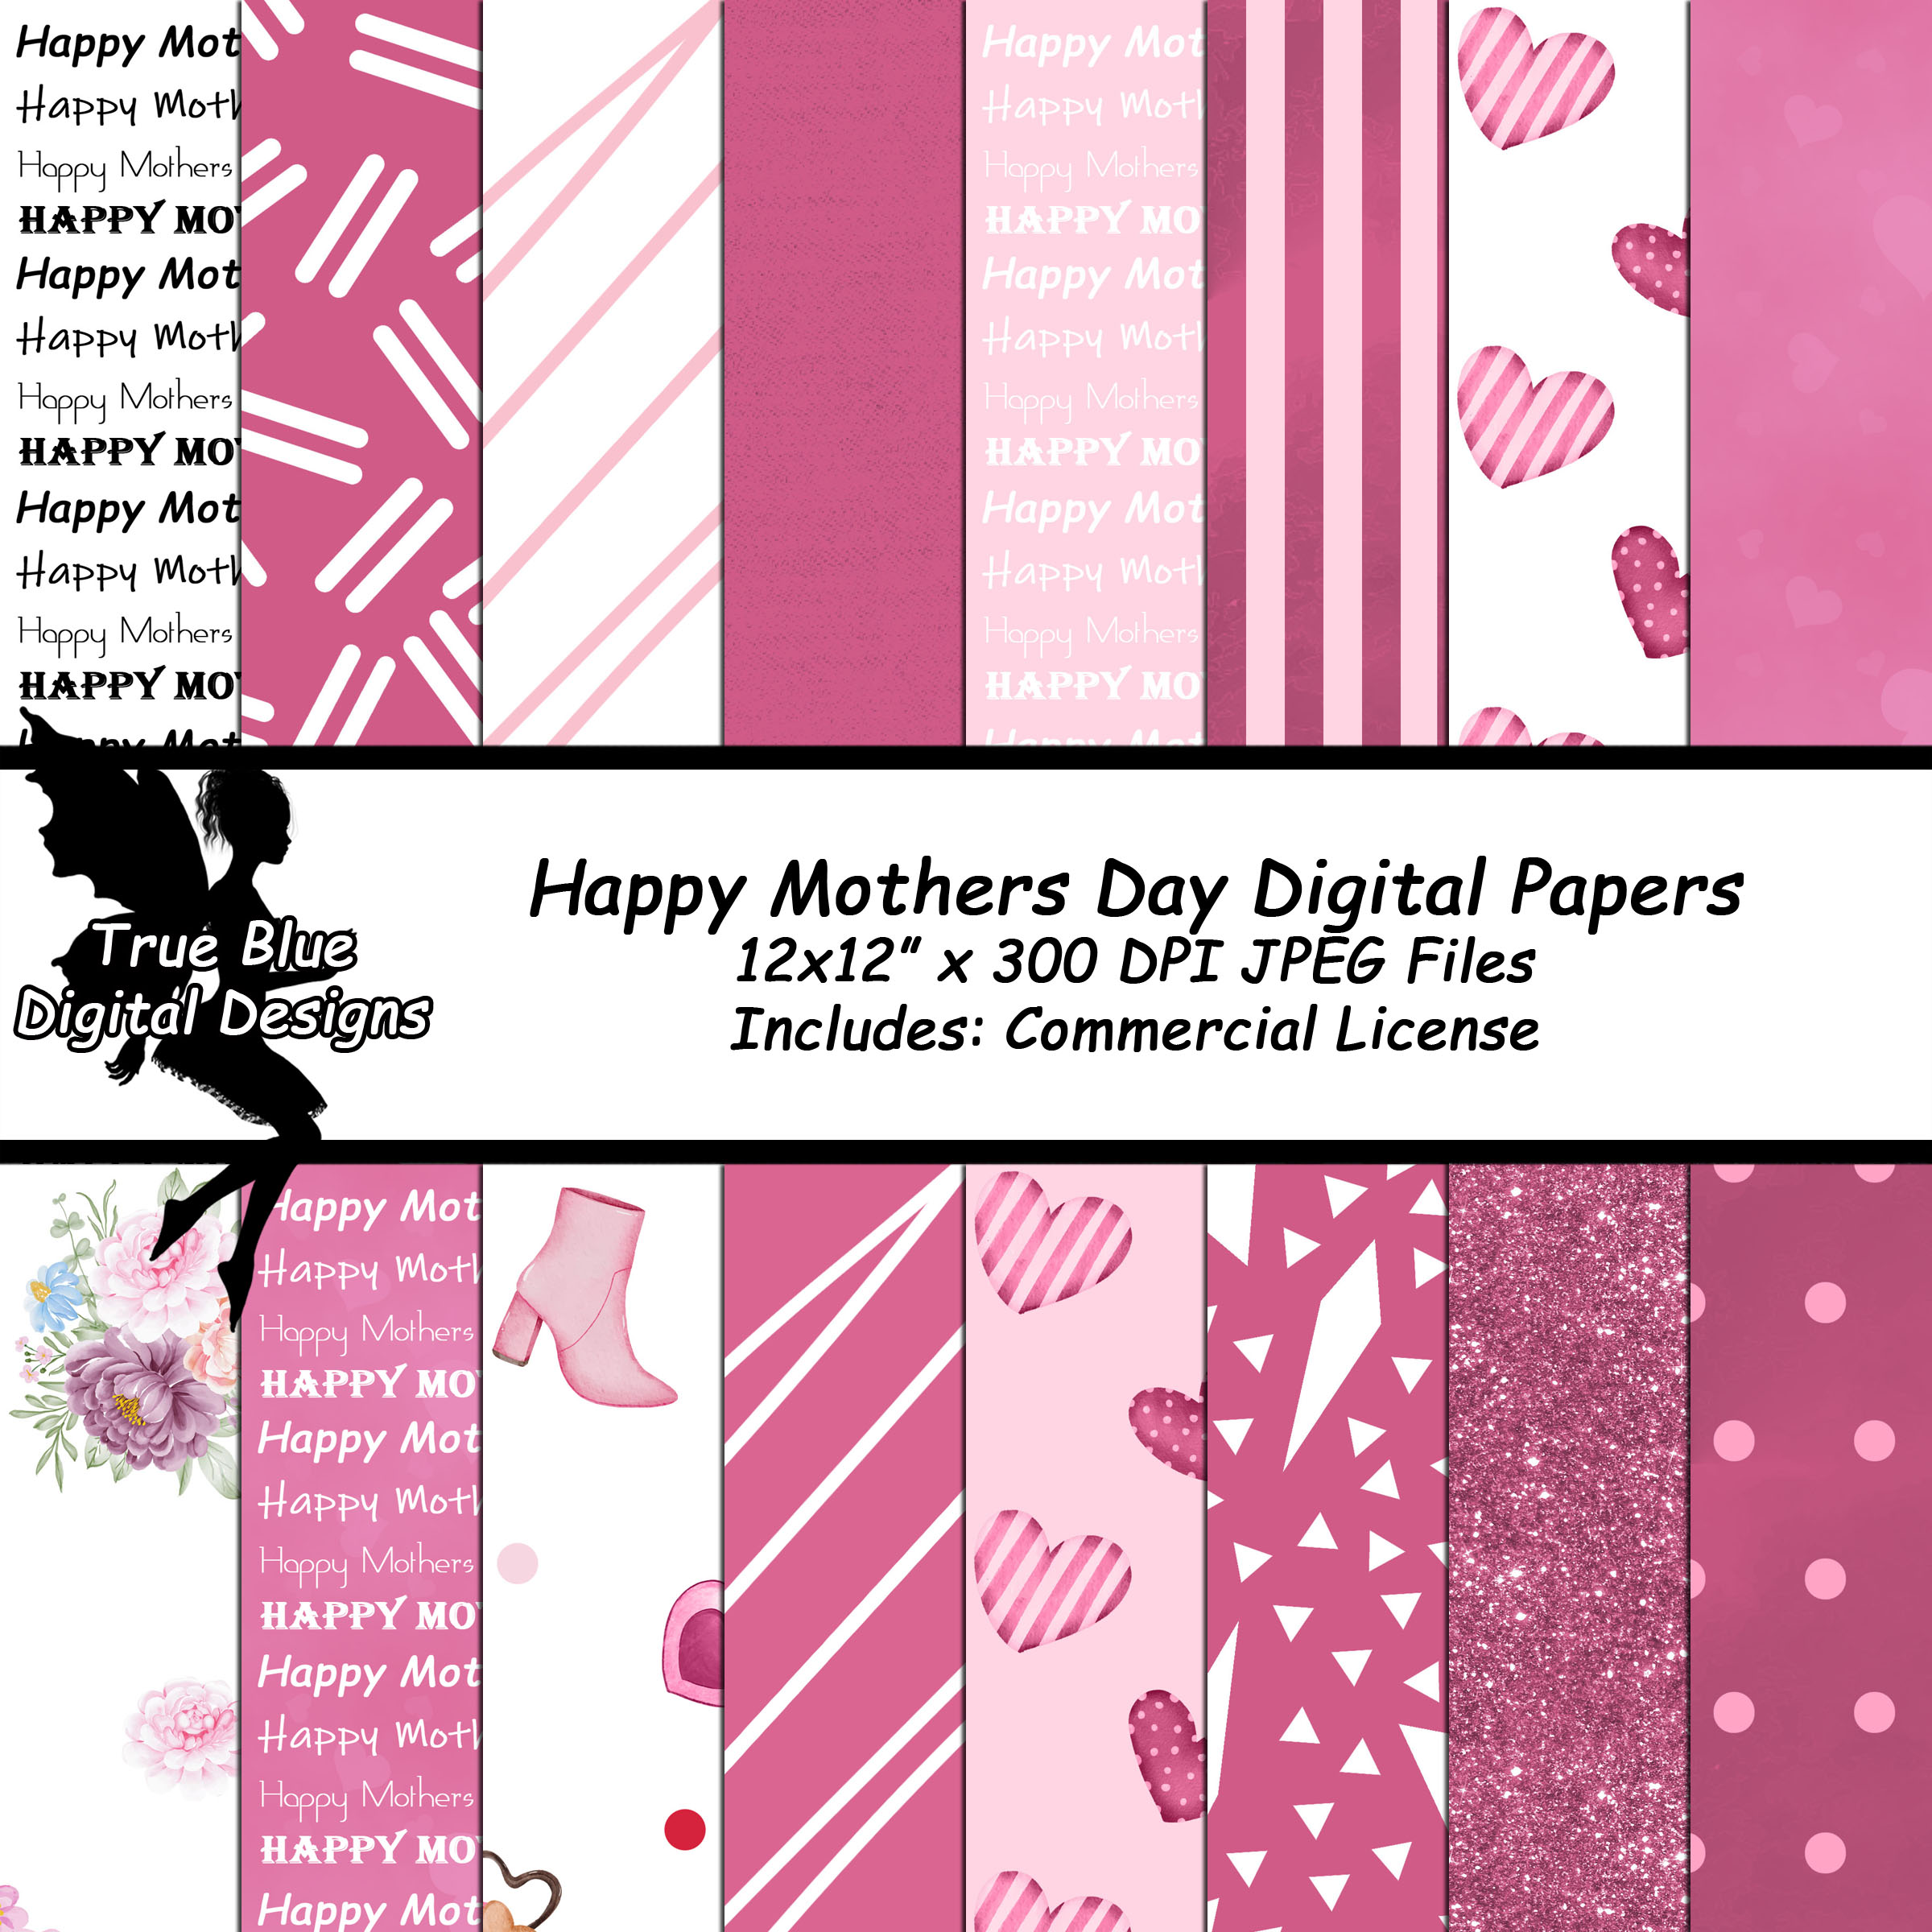 Happy Mothers Day Digital Papers